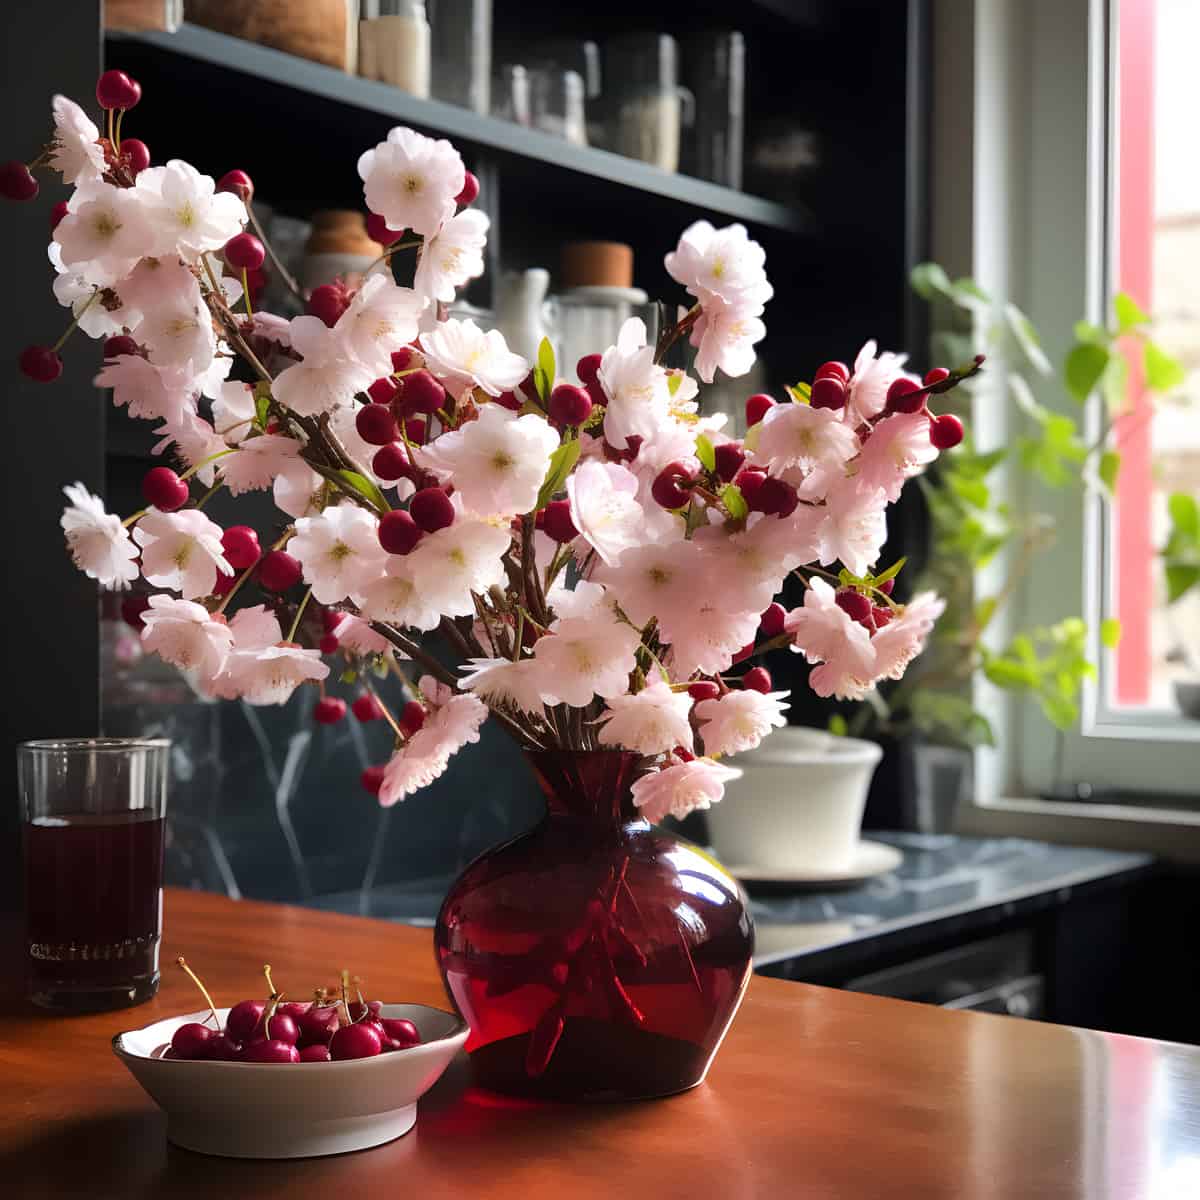 Prunus Bifrons on a kitchen counter